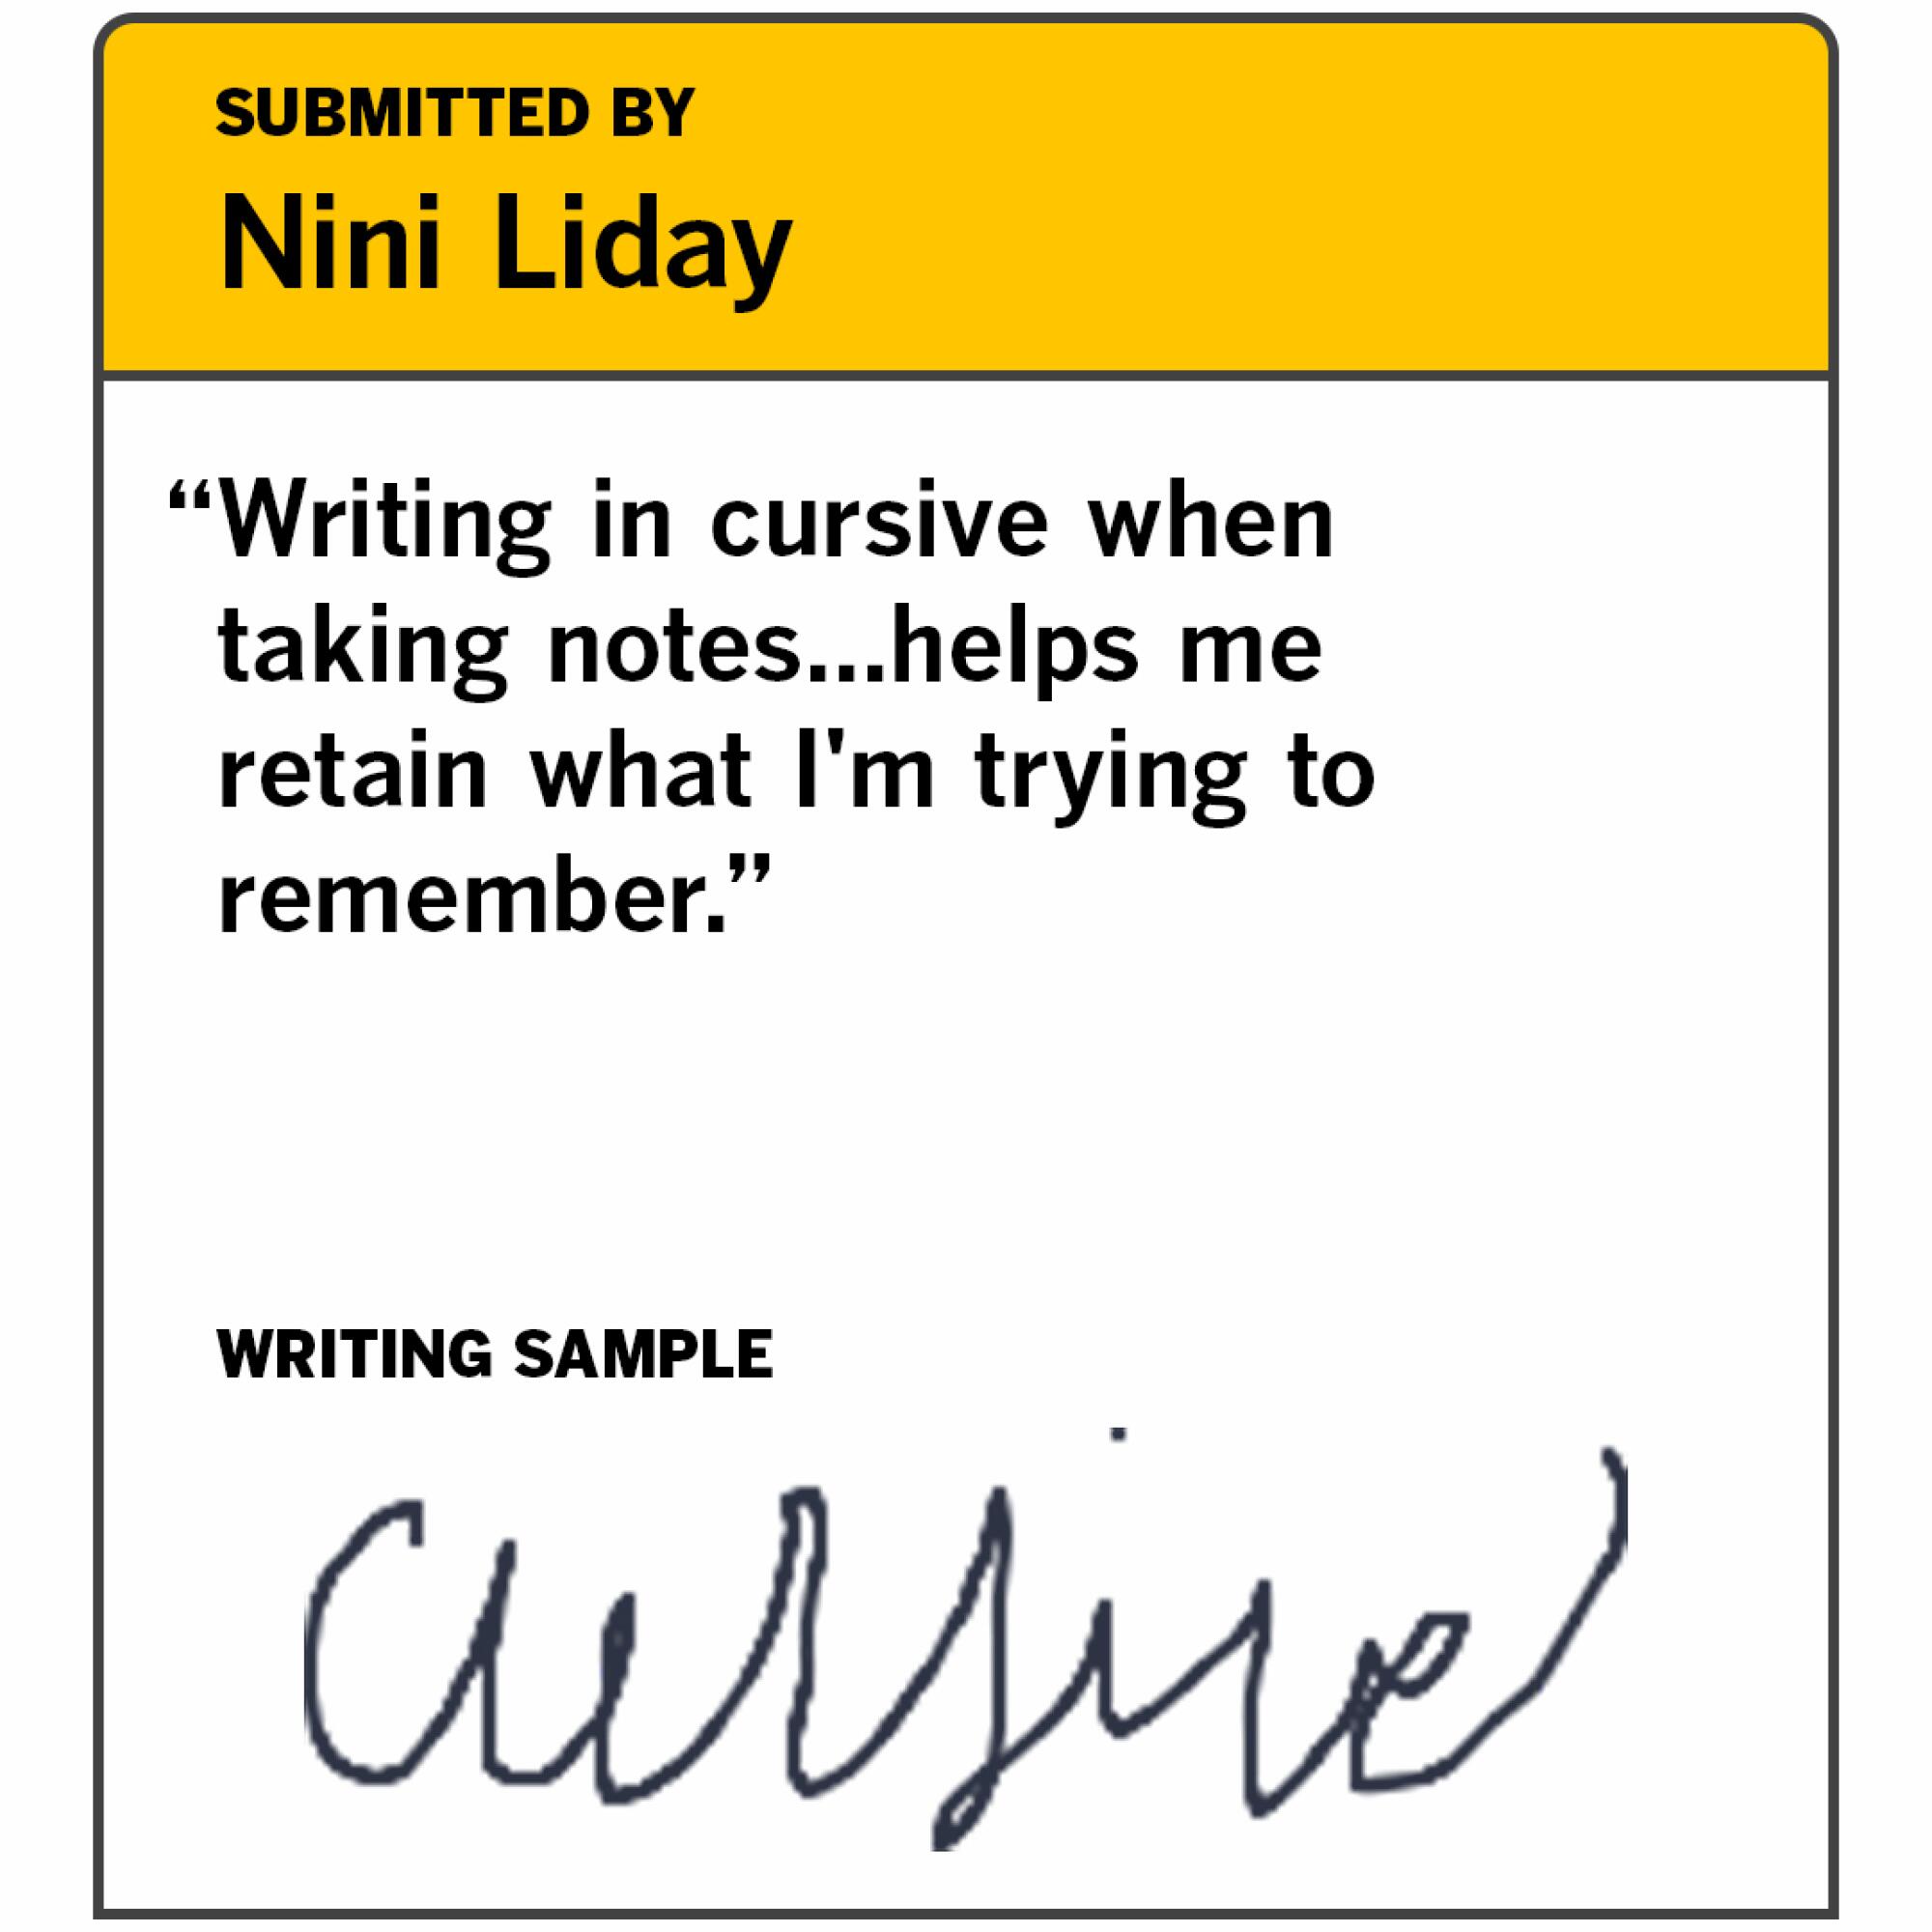 Example of cursive. "Writing in cursive when taking notes ... helps me retain what I'm trying to remember."